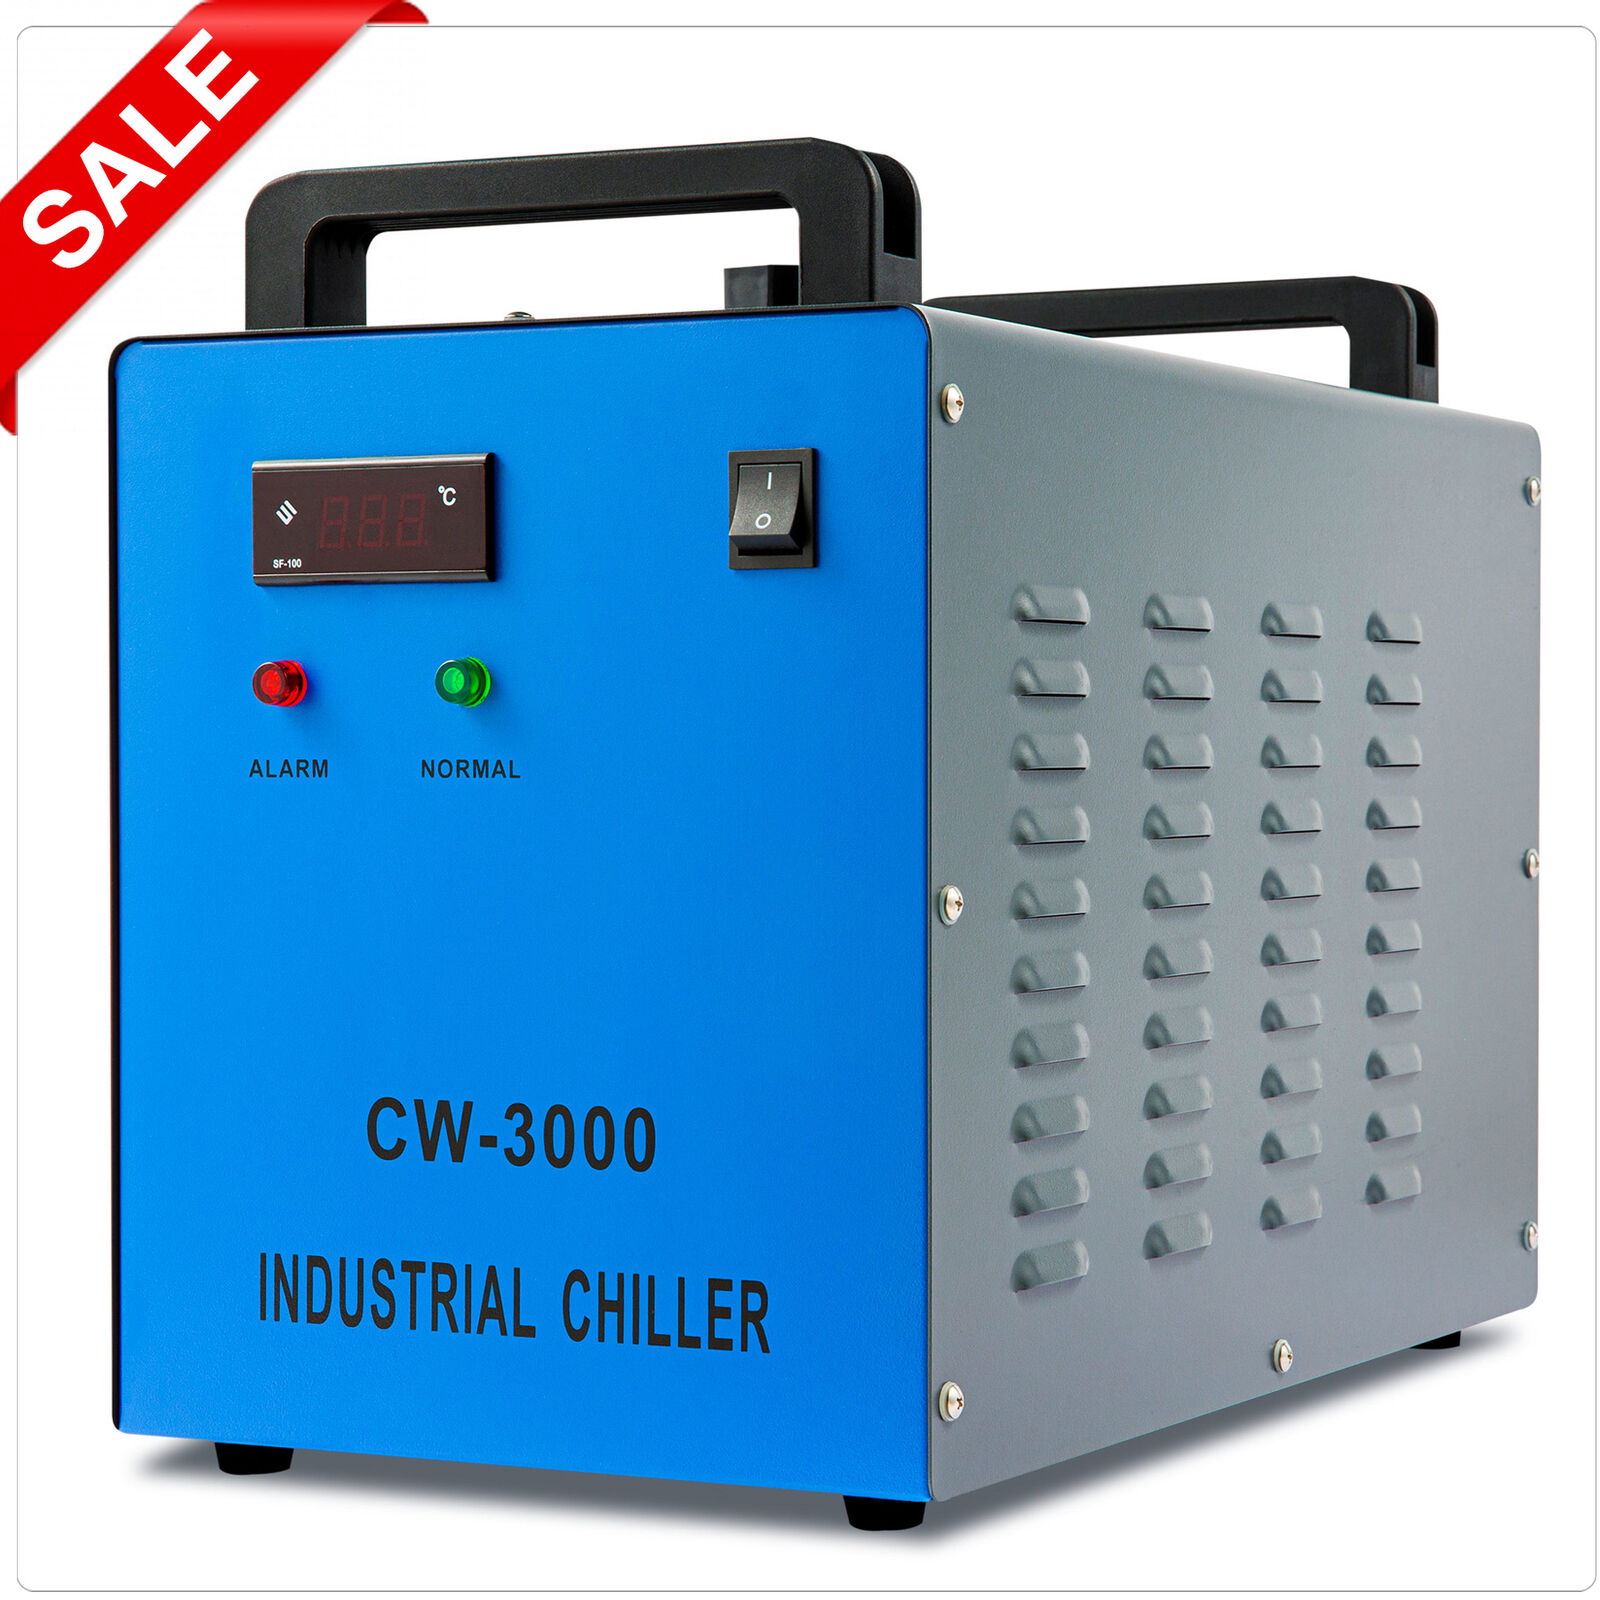 OMTech Industrial Water Chiller CW3000 for CNC CO2 Laser Engraver Cutter Marker